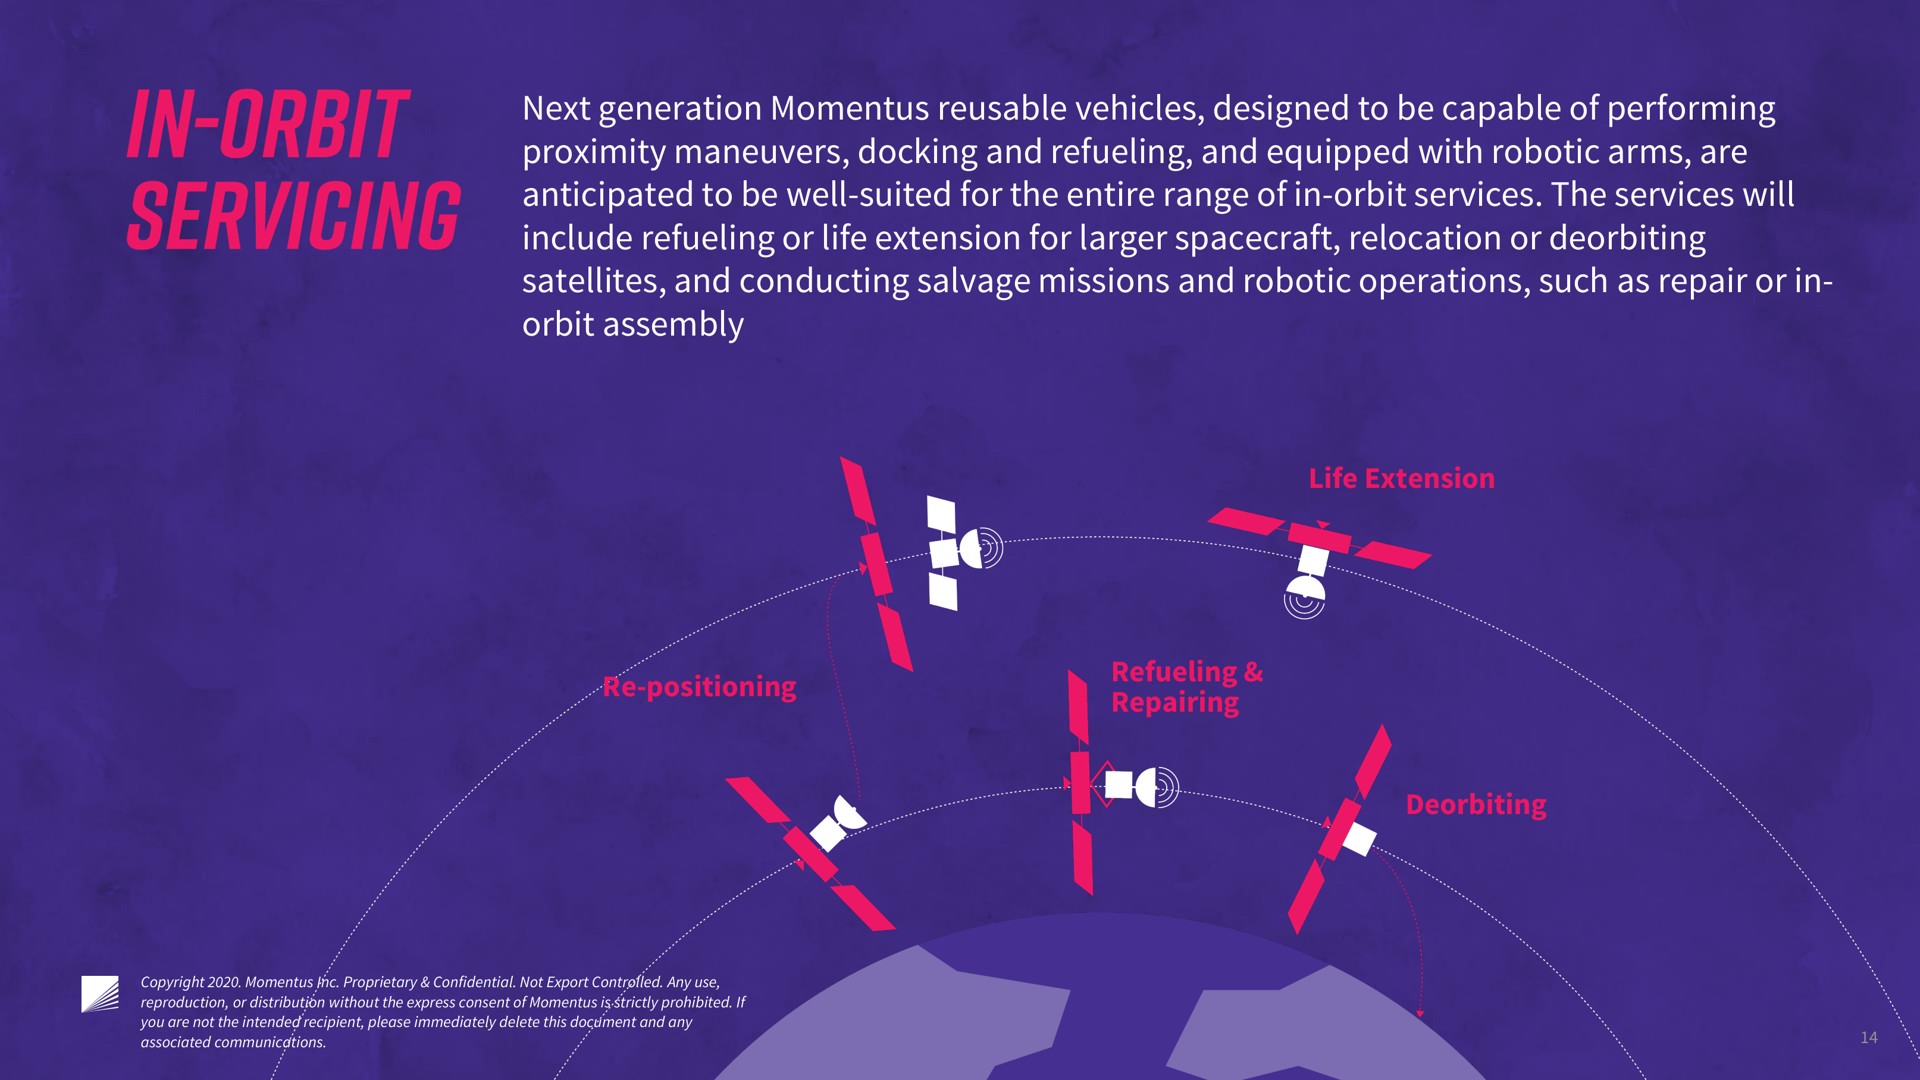 next generation vehicles designed to be capable of performing proximity maneuvers docking and refueling and equipped with arms are anticipated to be well suited for the entire range of in orbit services the services will include refueling or life extension for relocation or satellites and conducting salvage missions and operations such as repair or in orbit assembly | Momentus